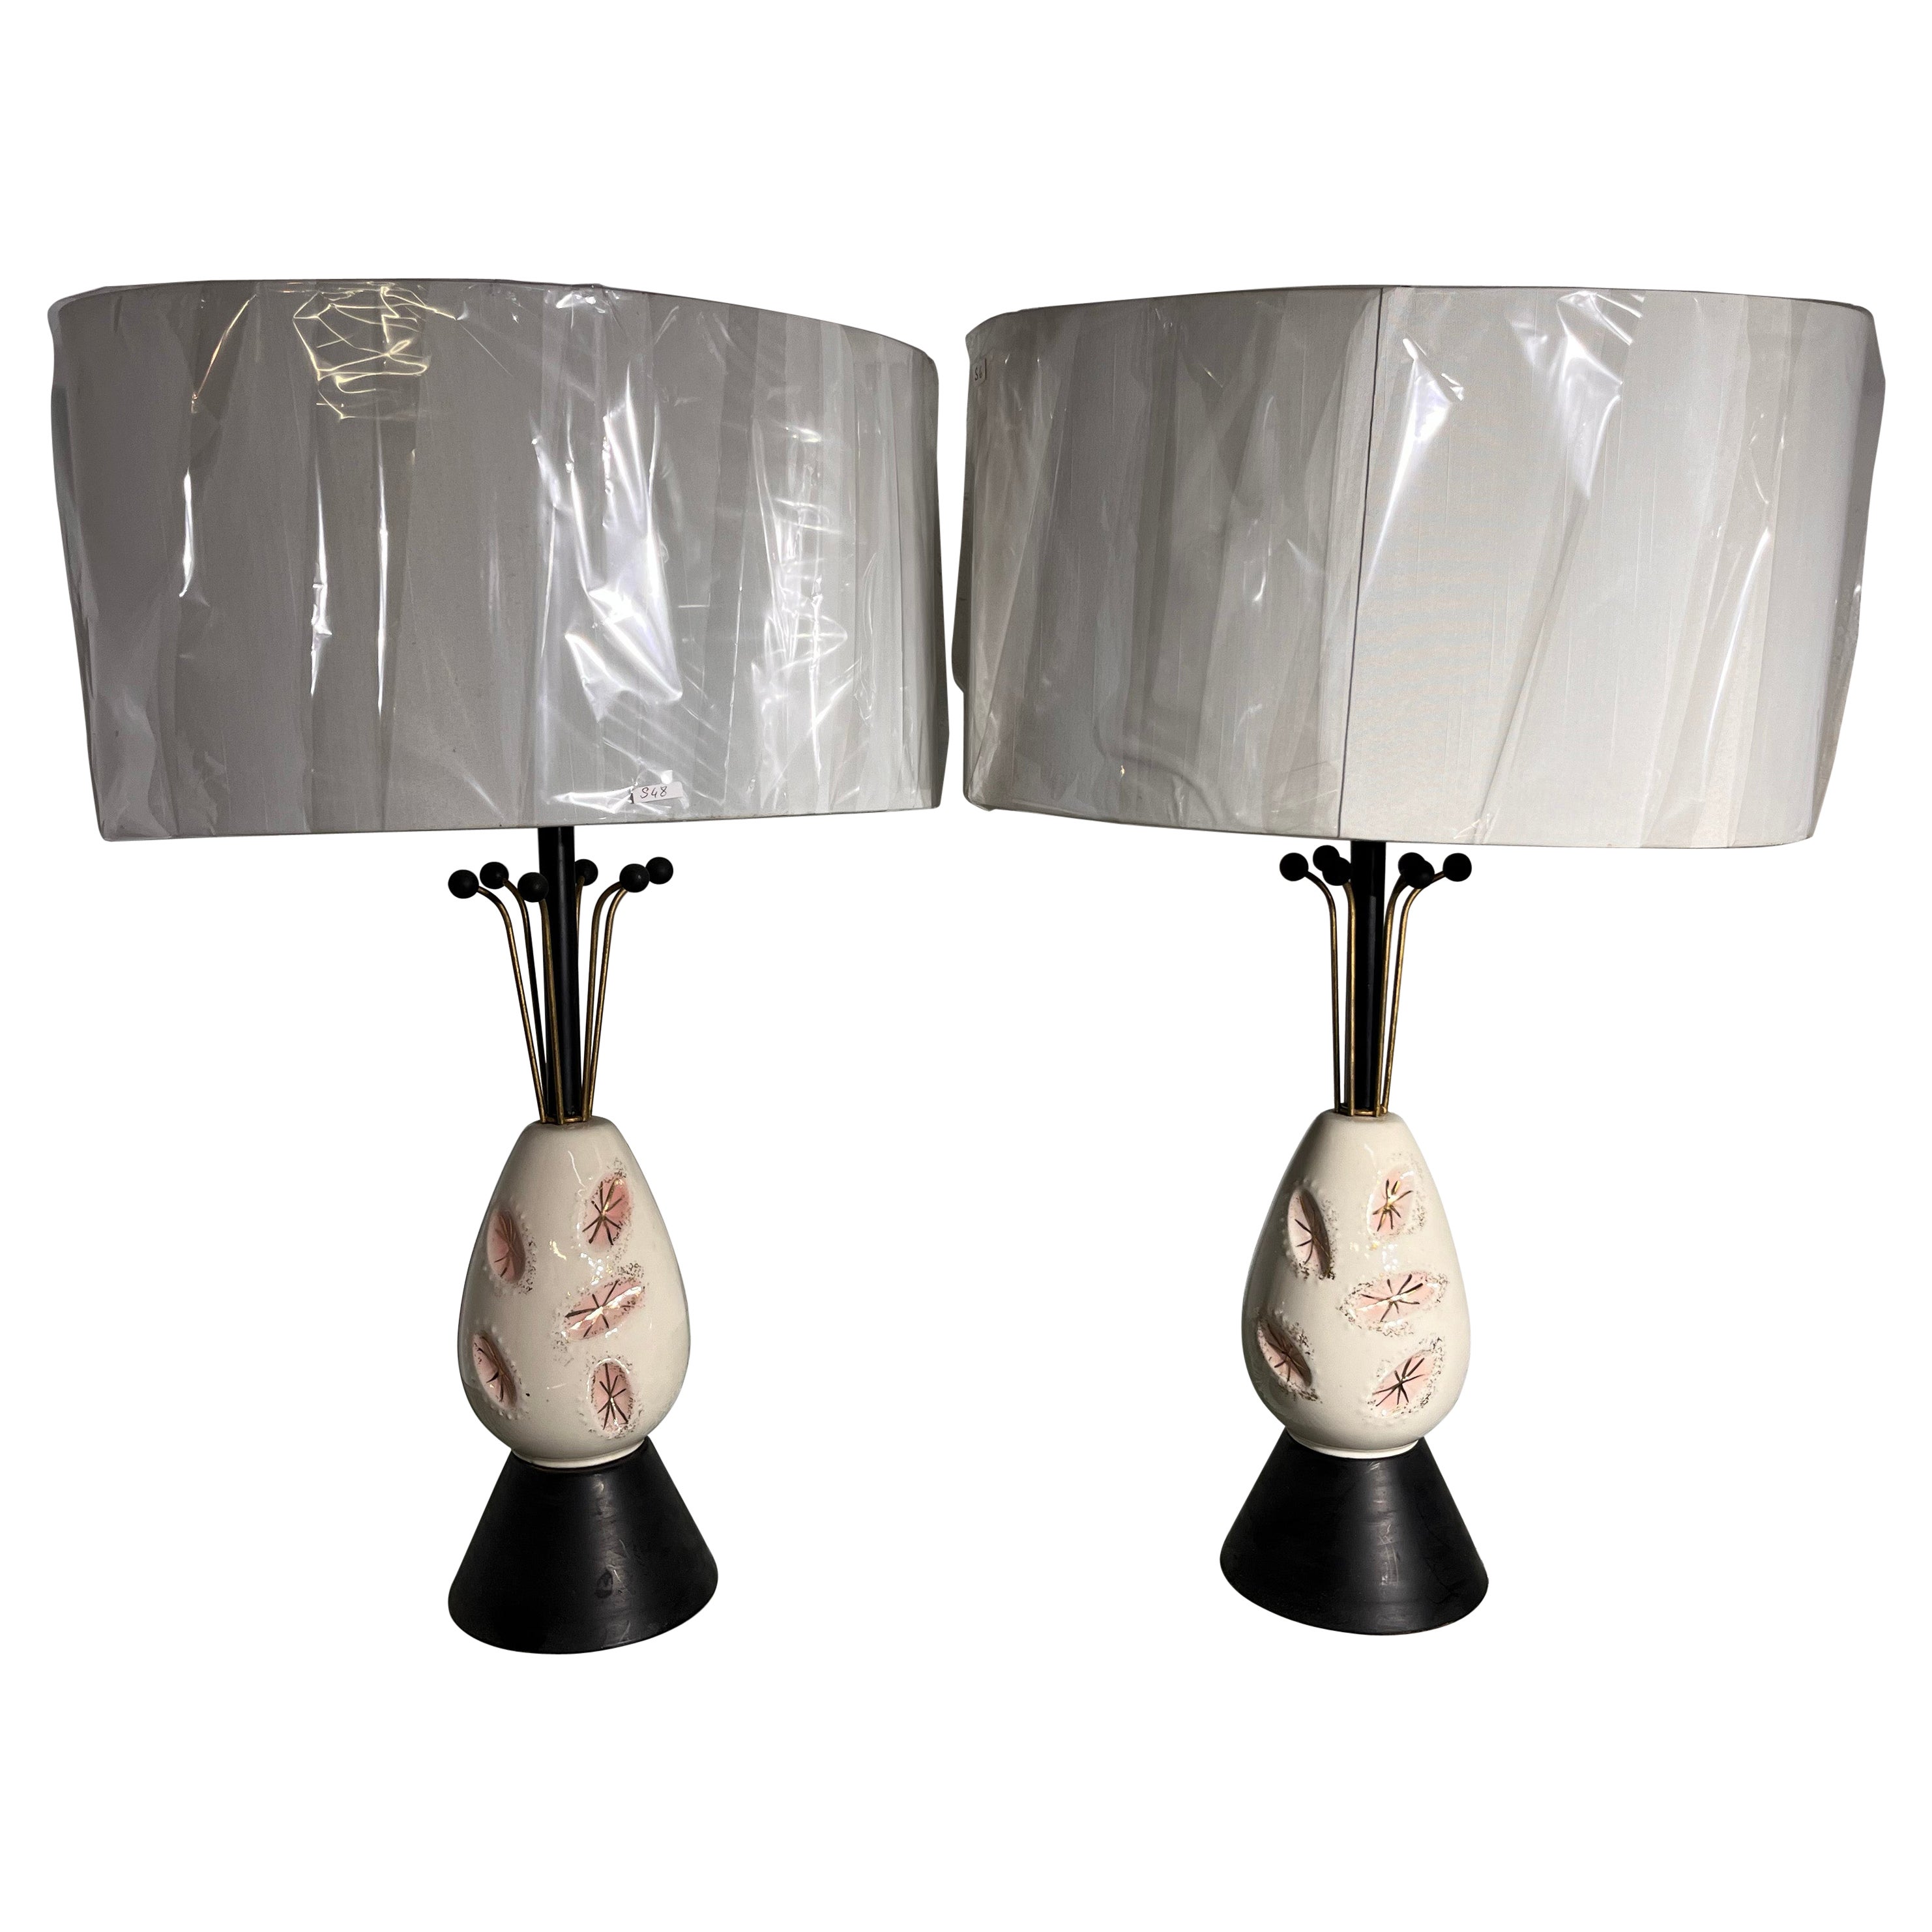 American Mid-Century Modern Pair of White and Pink Ceramic Table Lamps